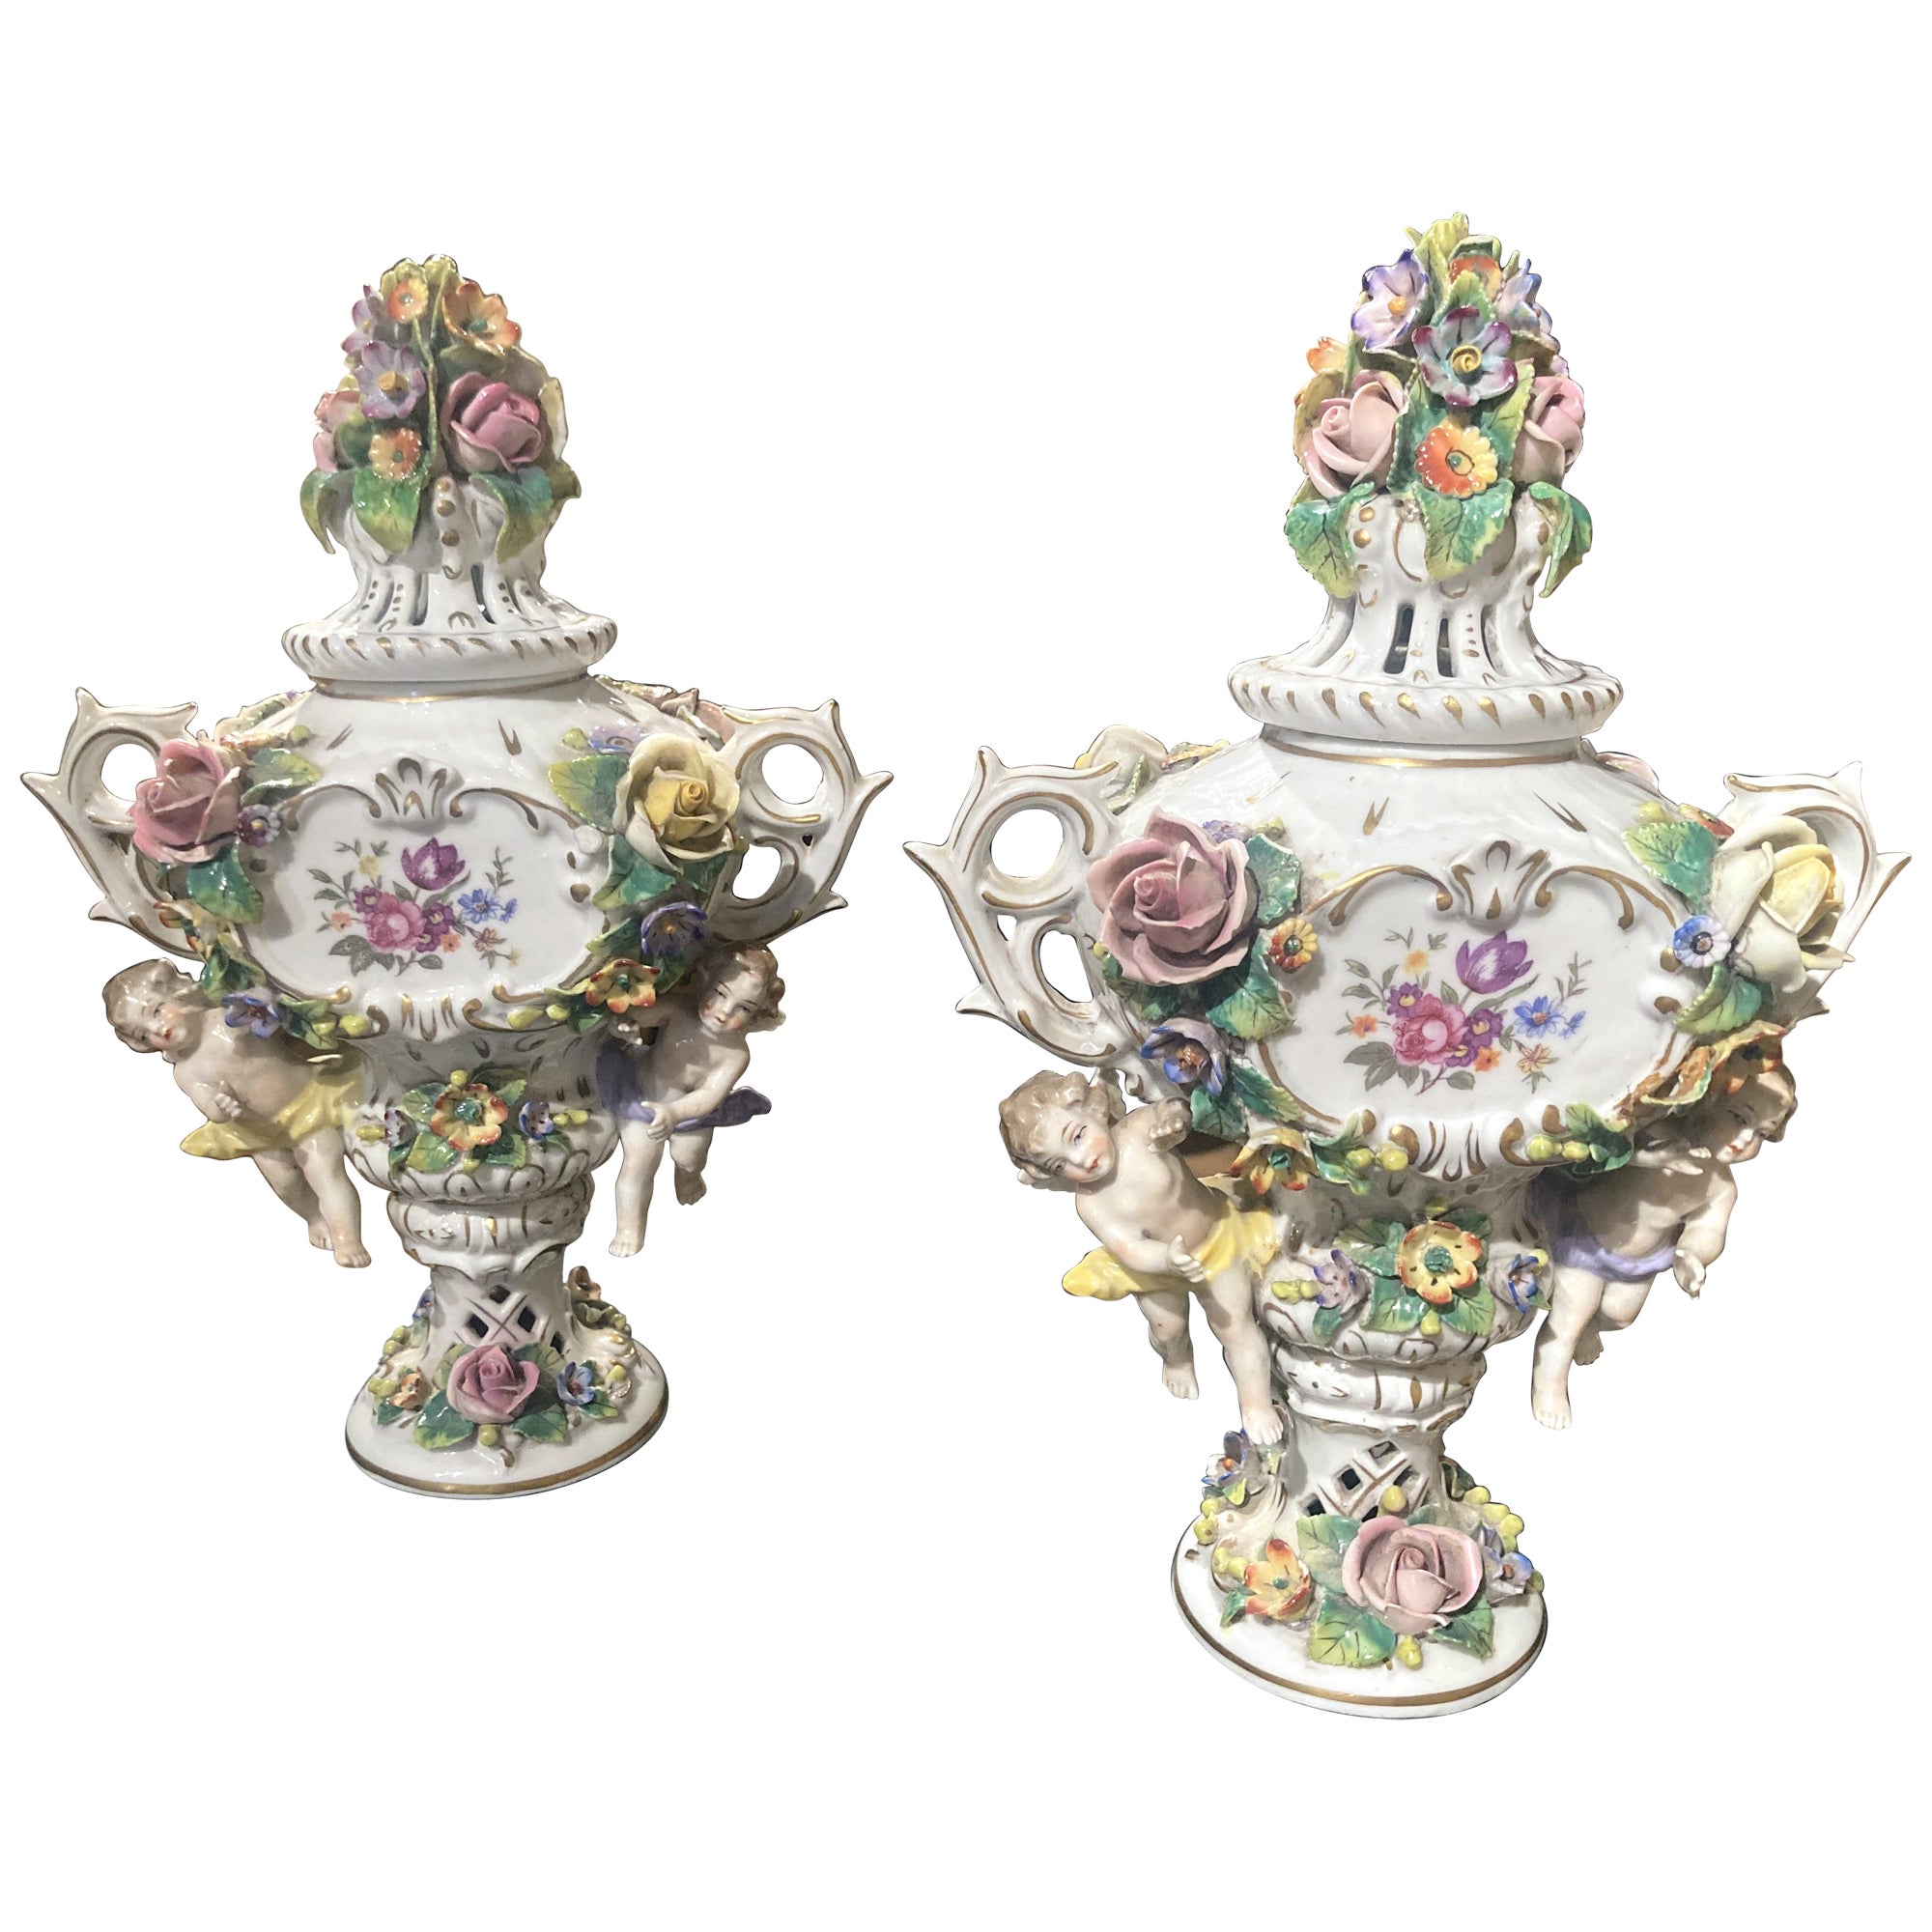 19th Century Capodimonte Polychrome Porcelain Incense Burners Vases with Flowers For Sale